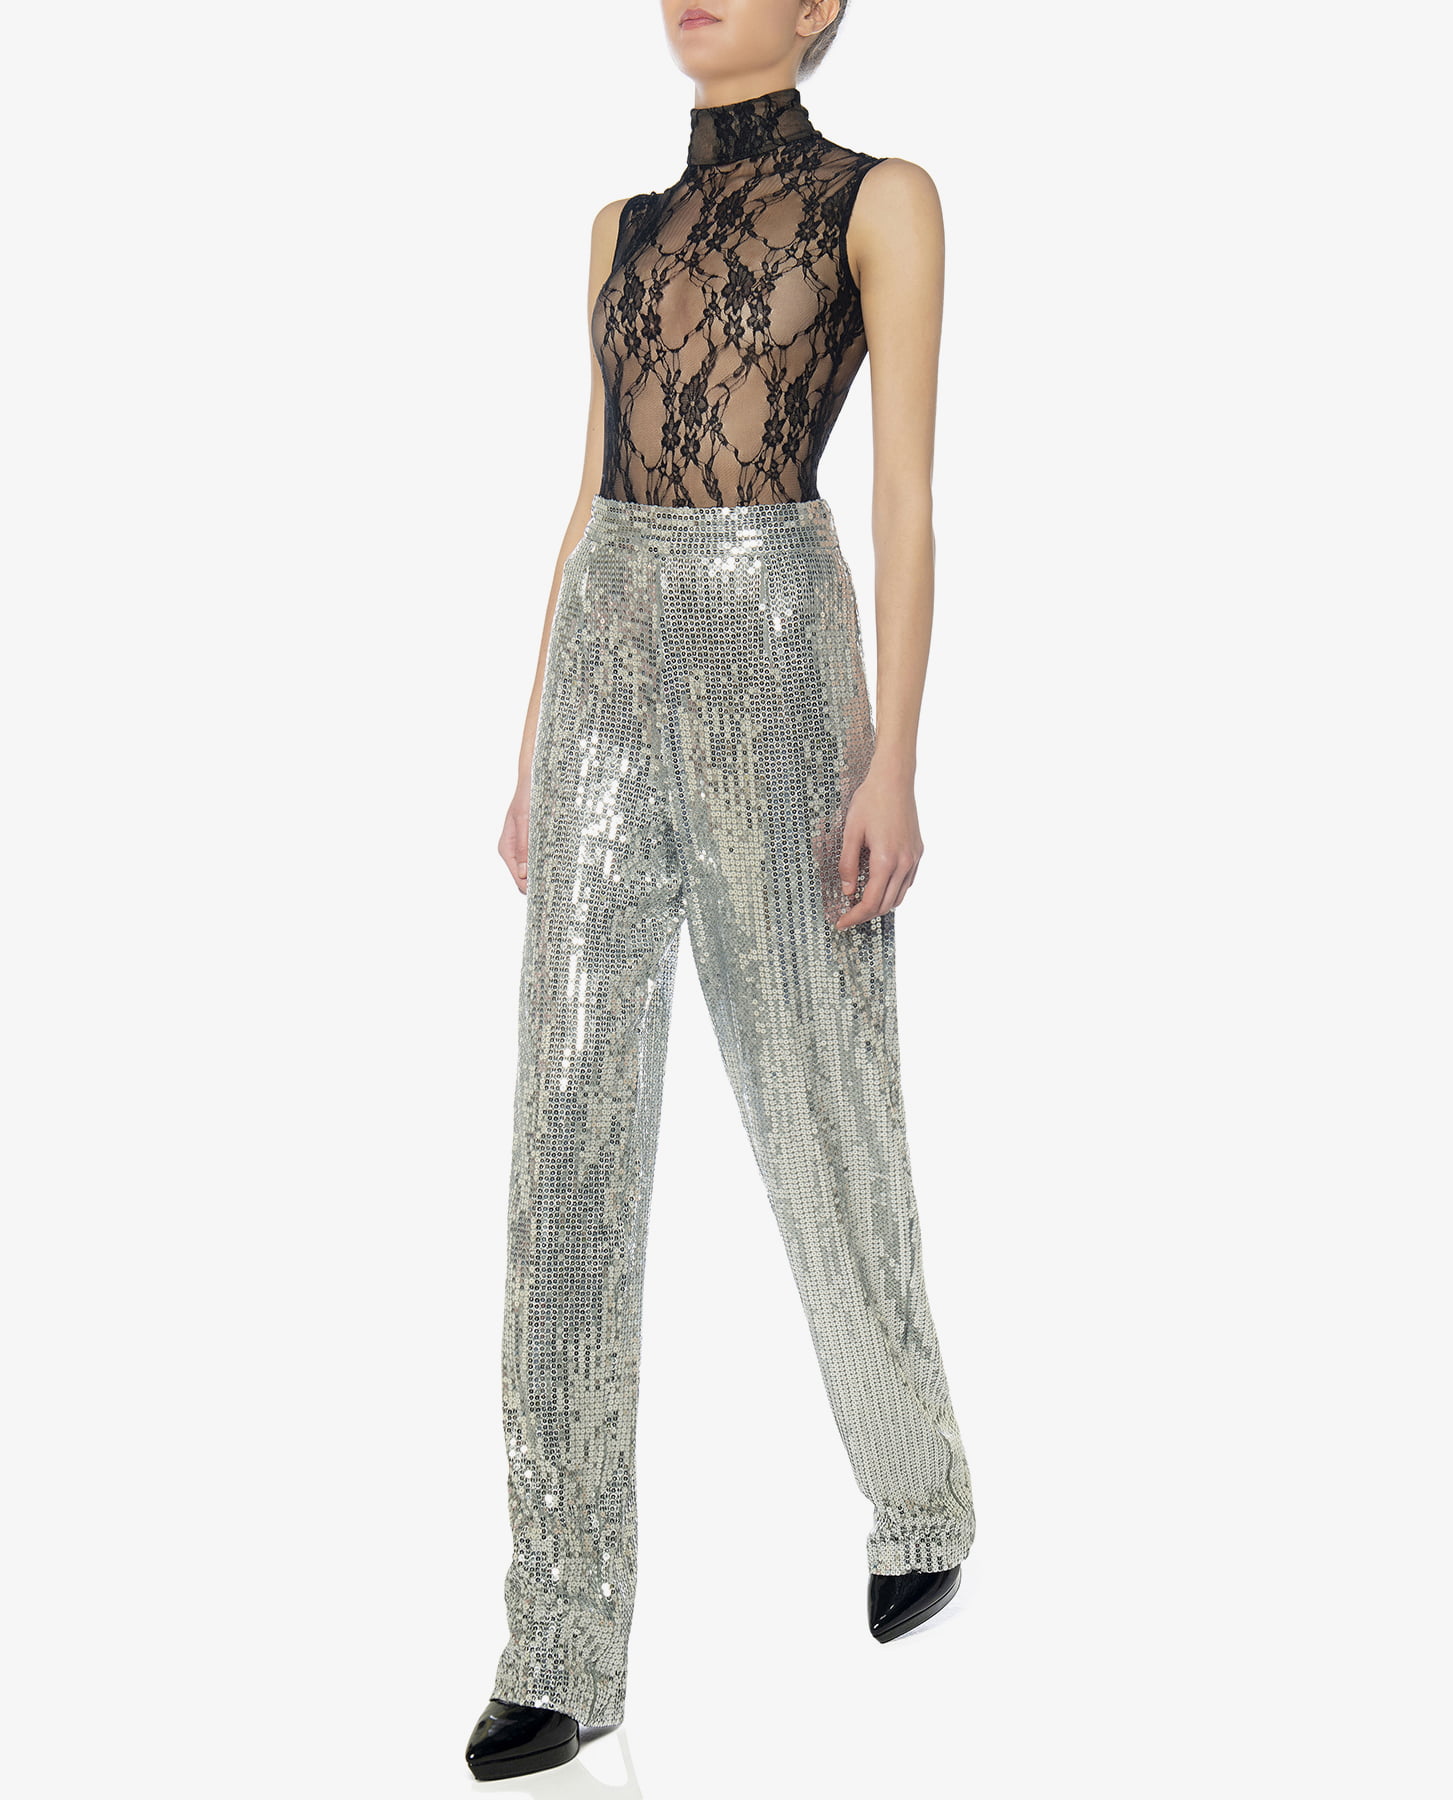 The 18 Best Sequin Pants for All Your Parties This Season | Who What Wear